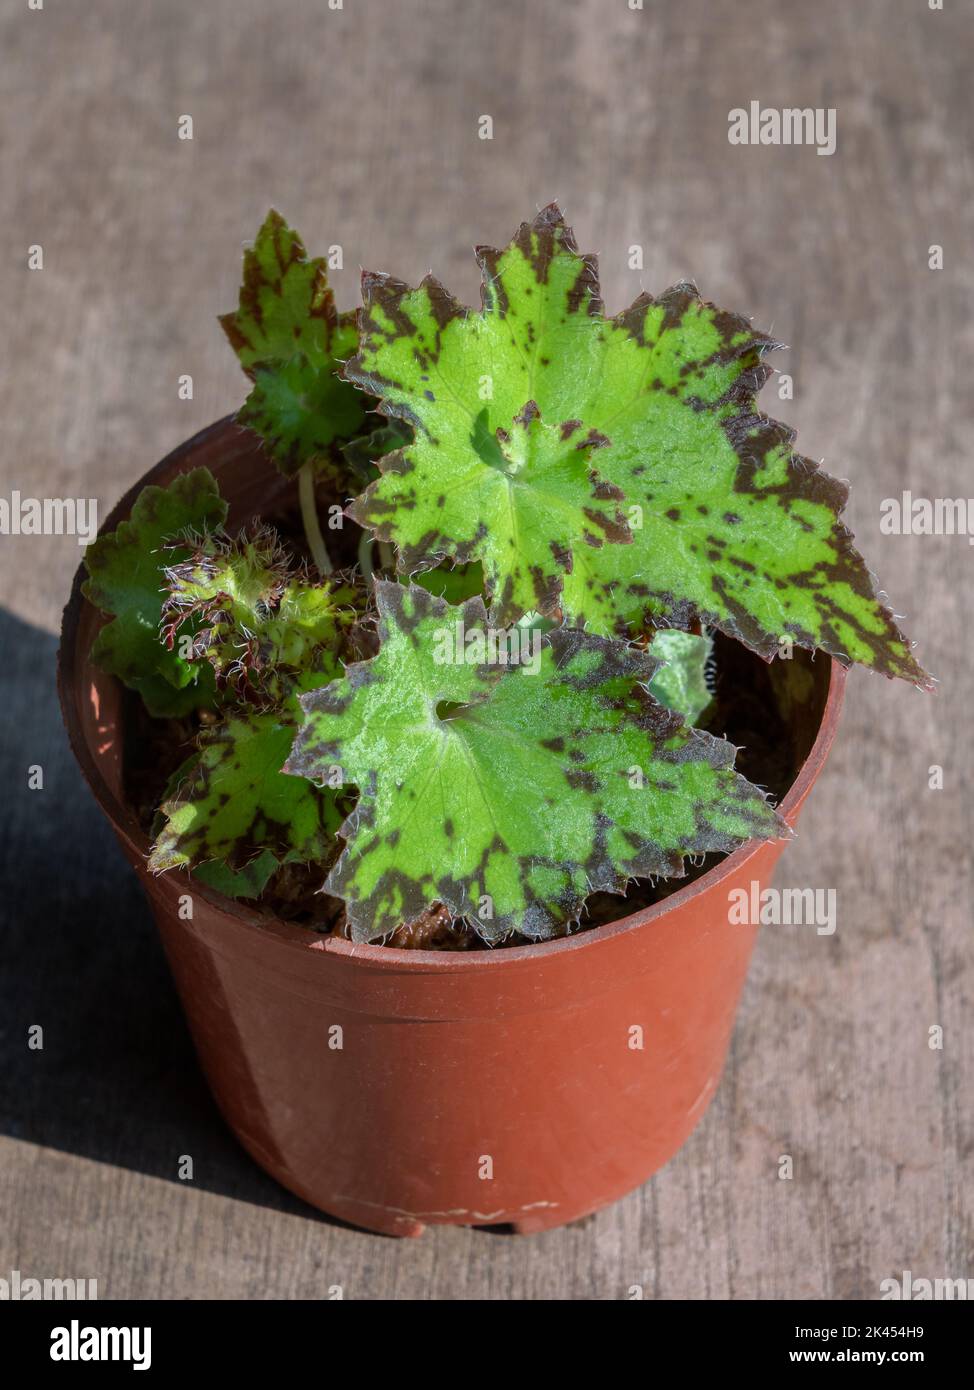 Closeup view of small rhizomatous begonia rex 'jive' hybrid with bright chartreuse green and chocolate brown leaves isolated on wooden background Stock Photo